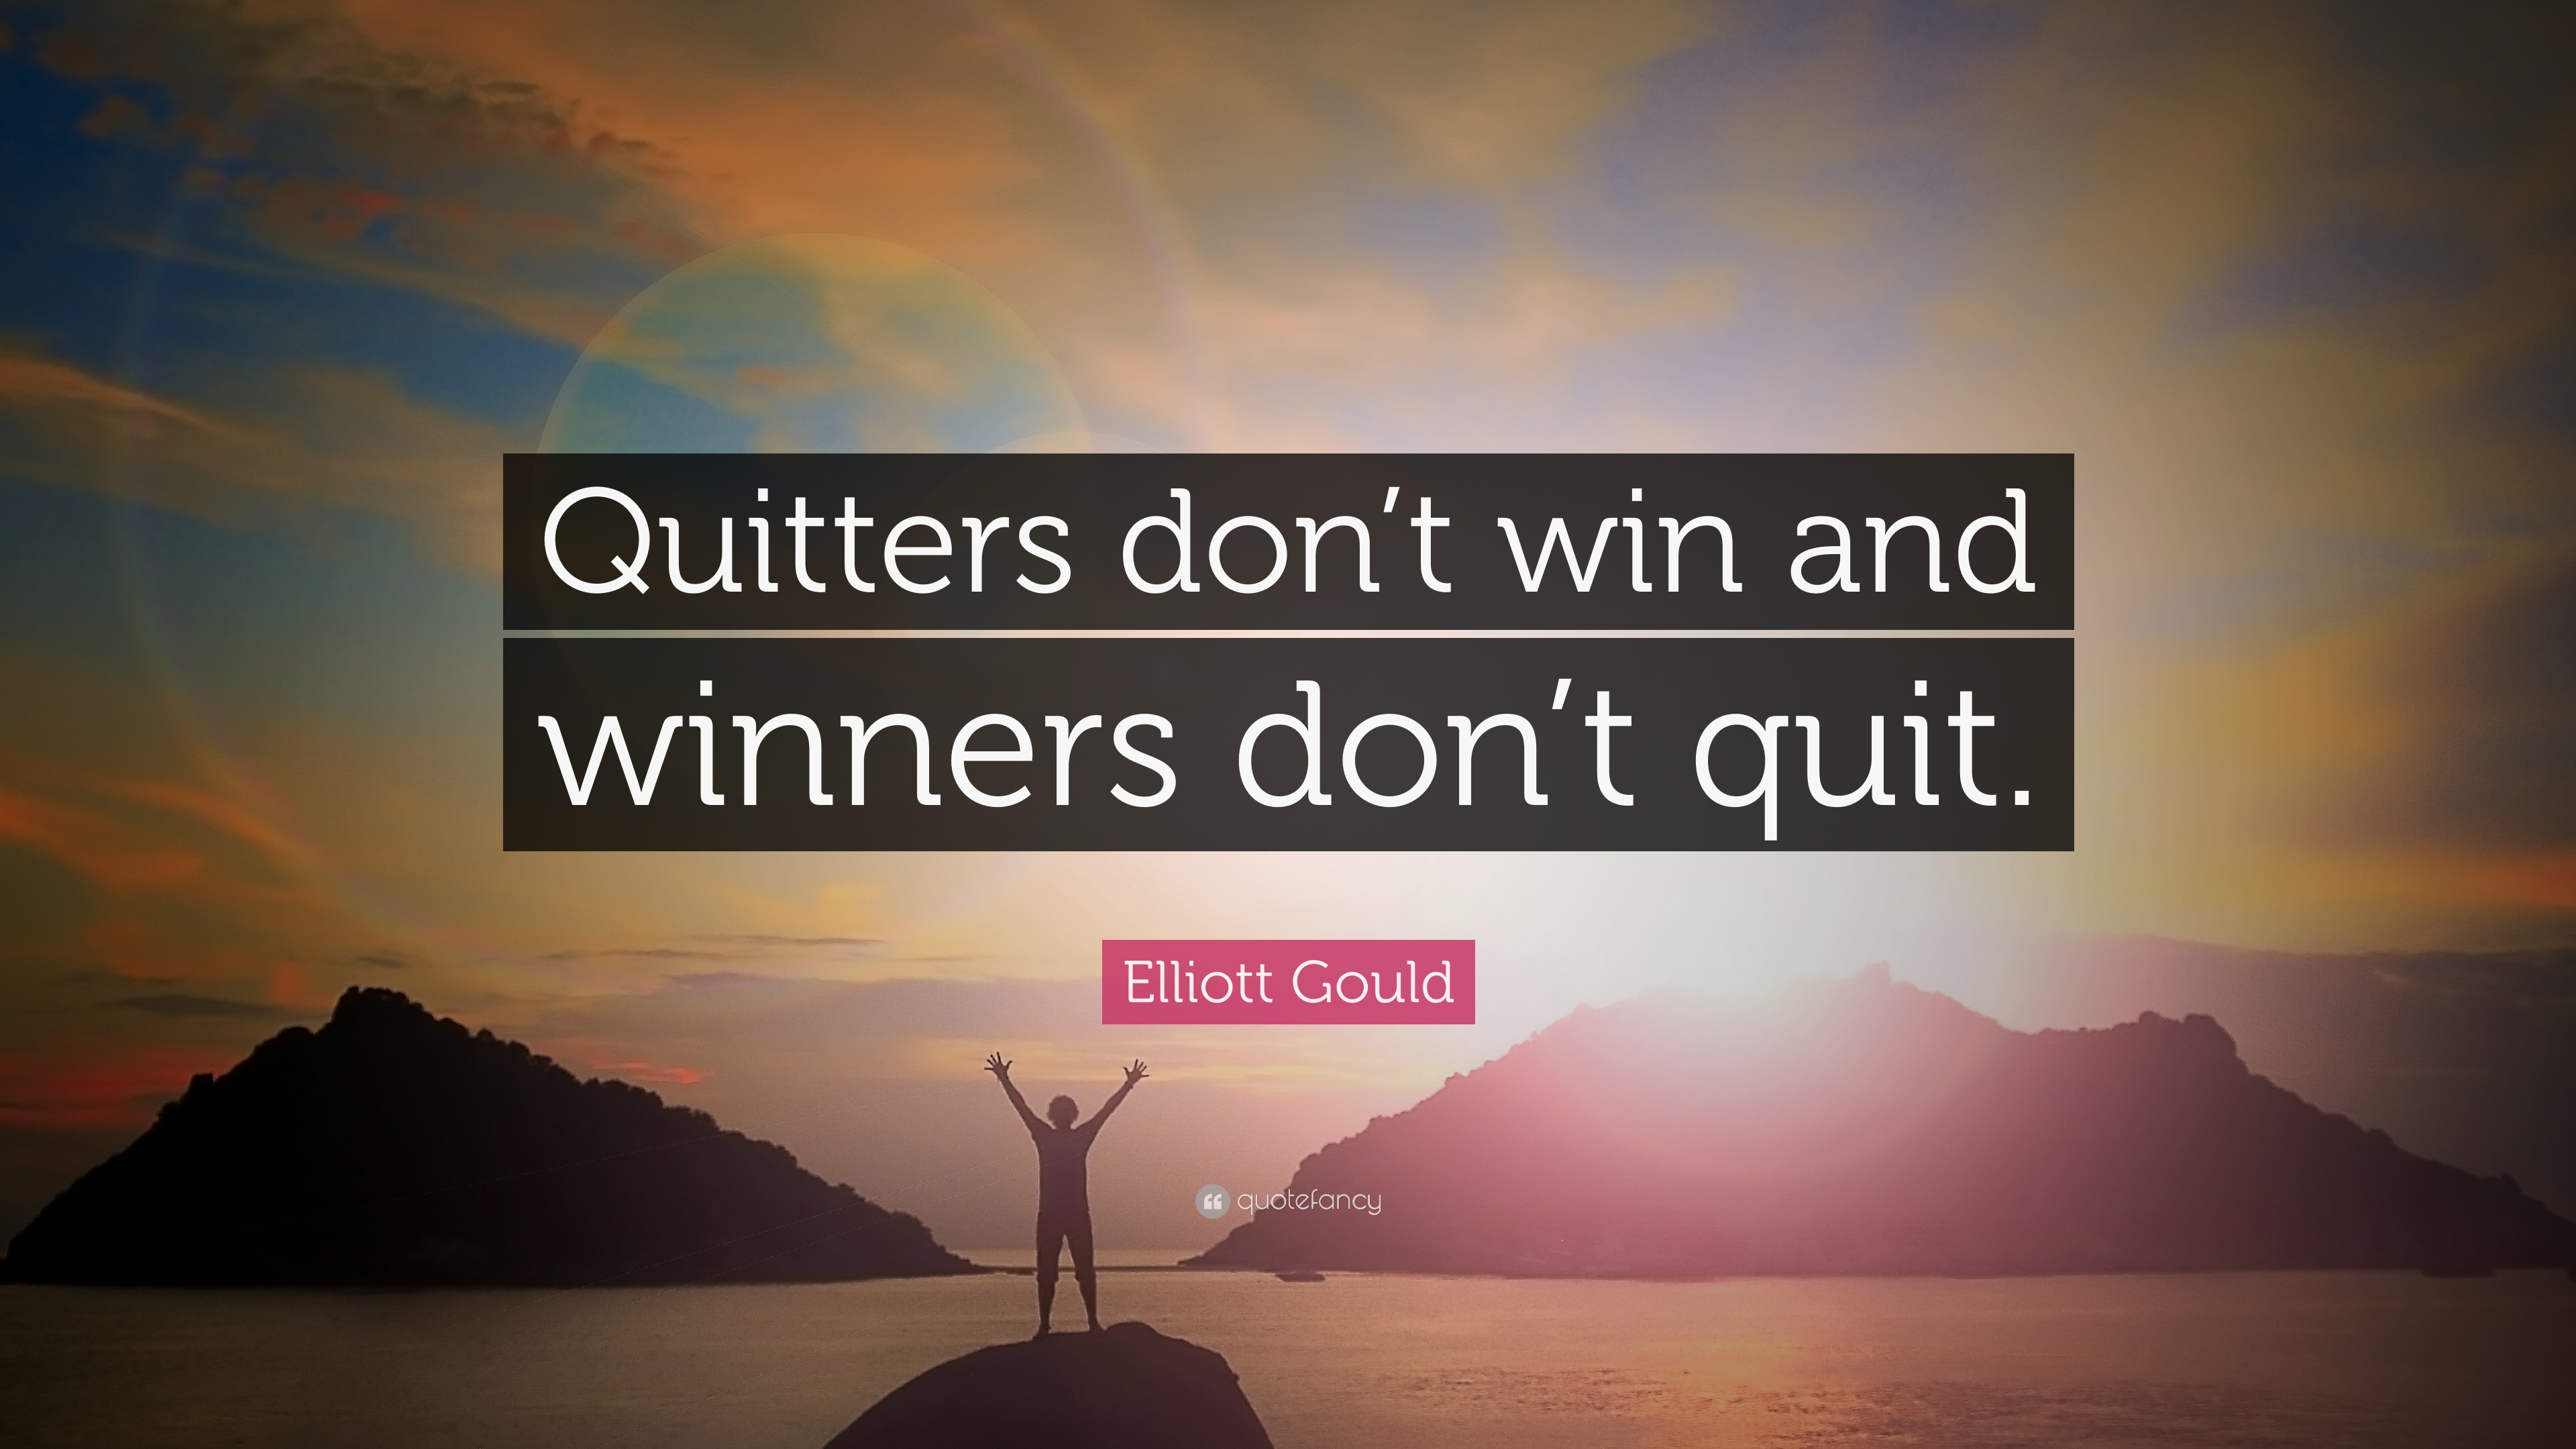 Elliott Gould Quote: “Quitters don't win and winners don't